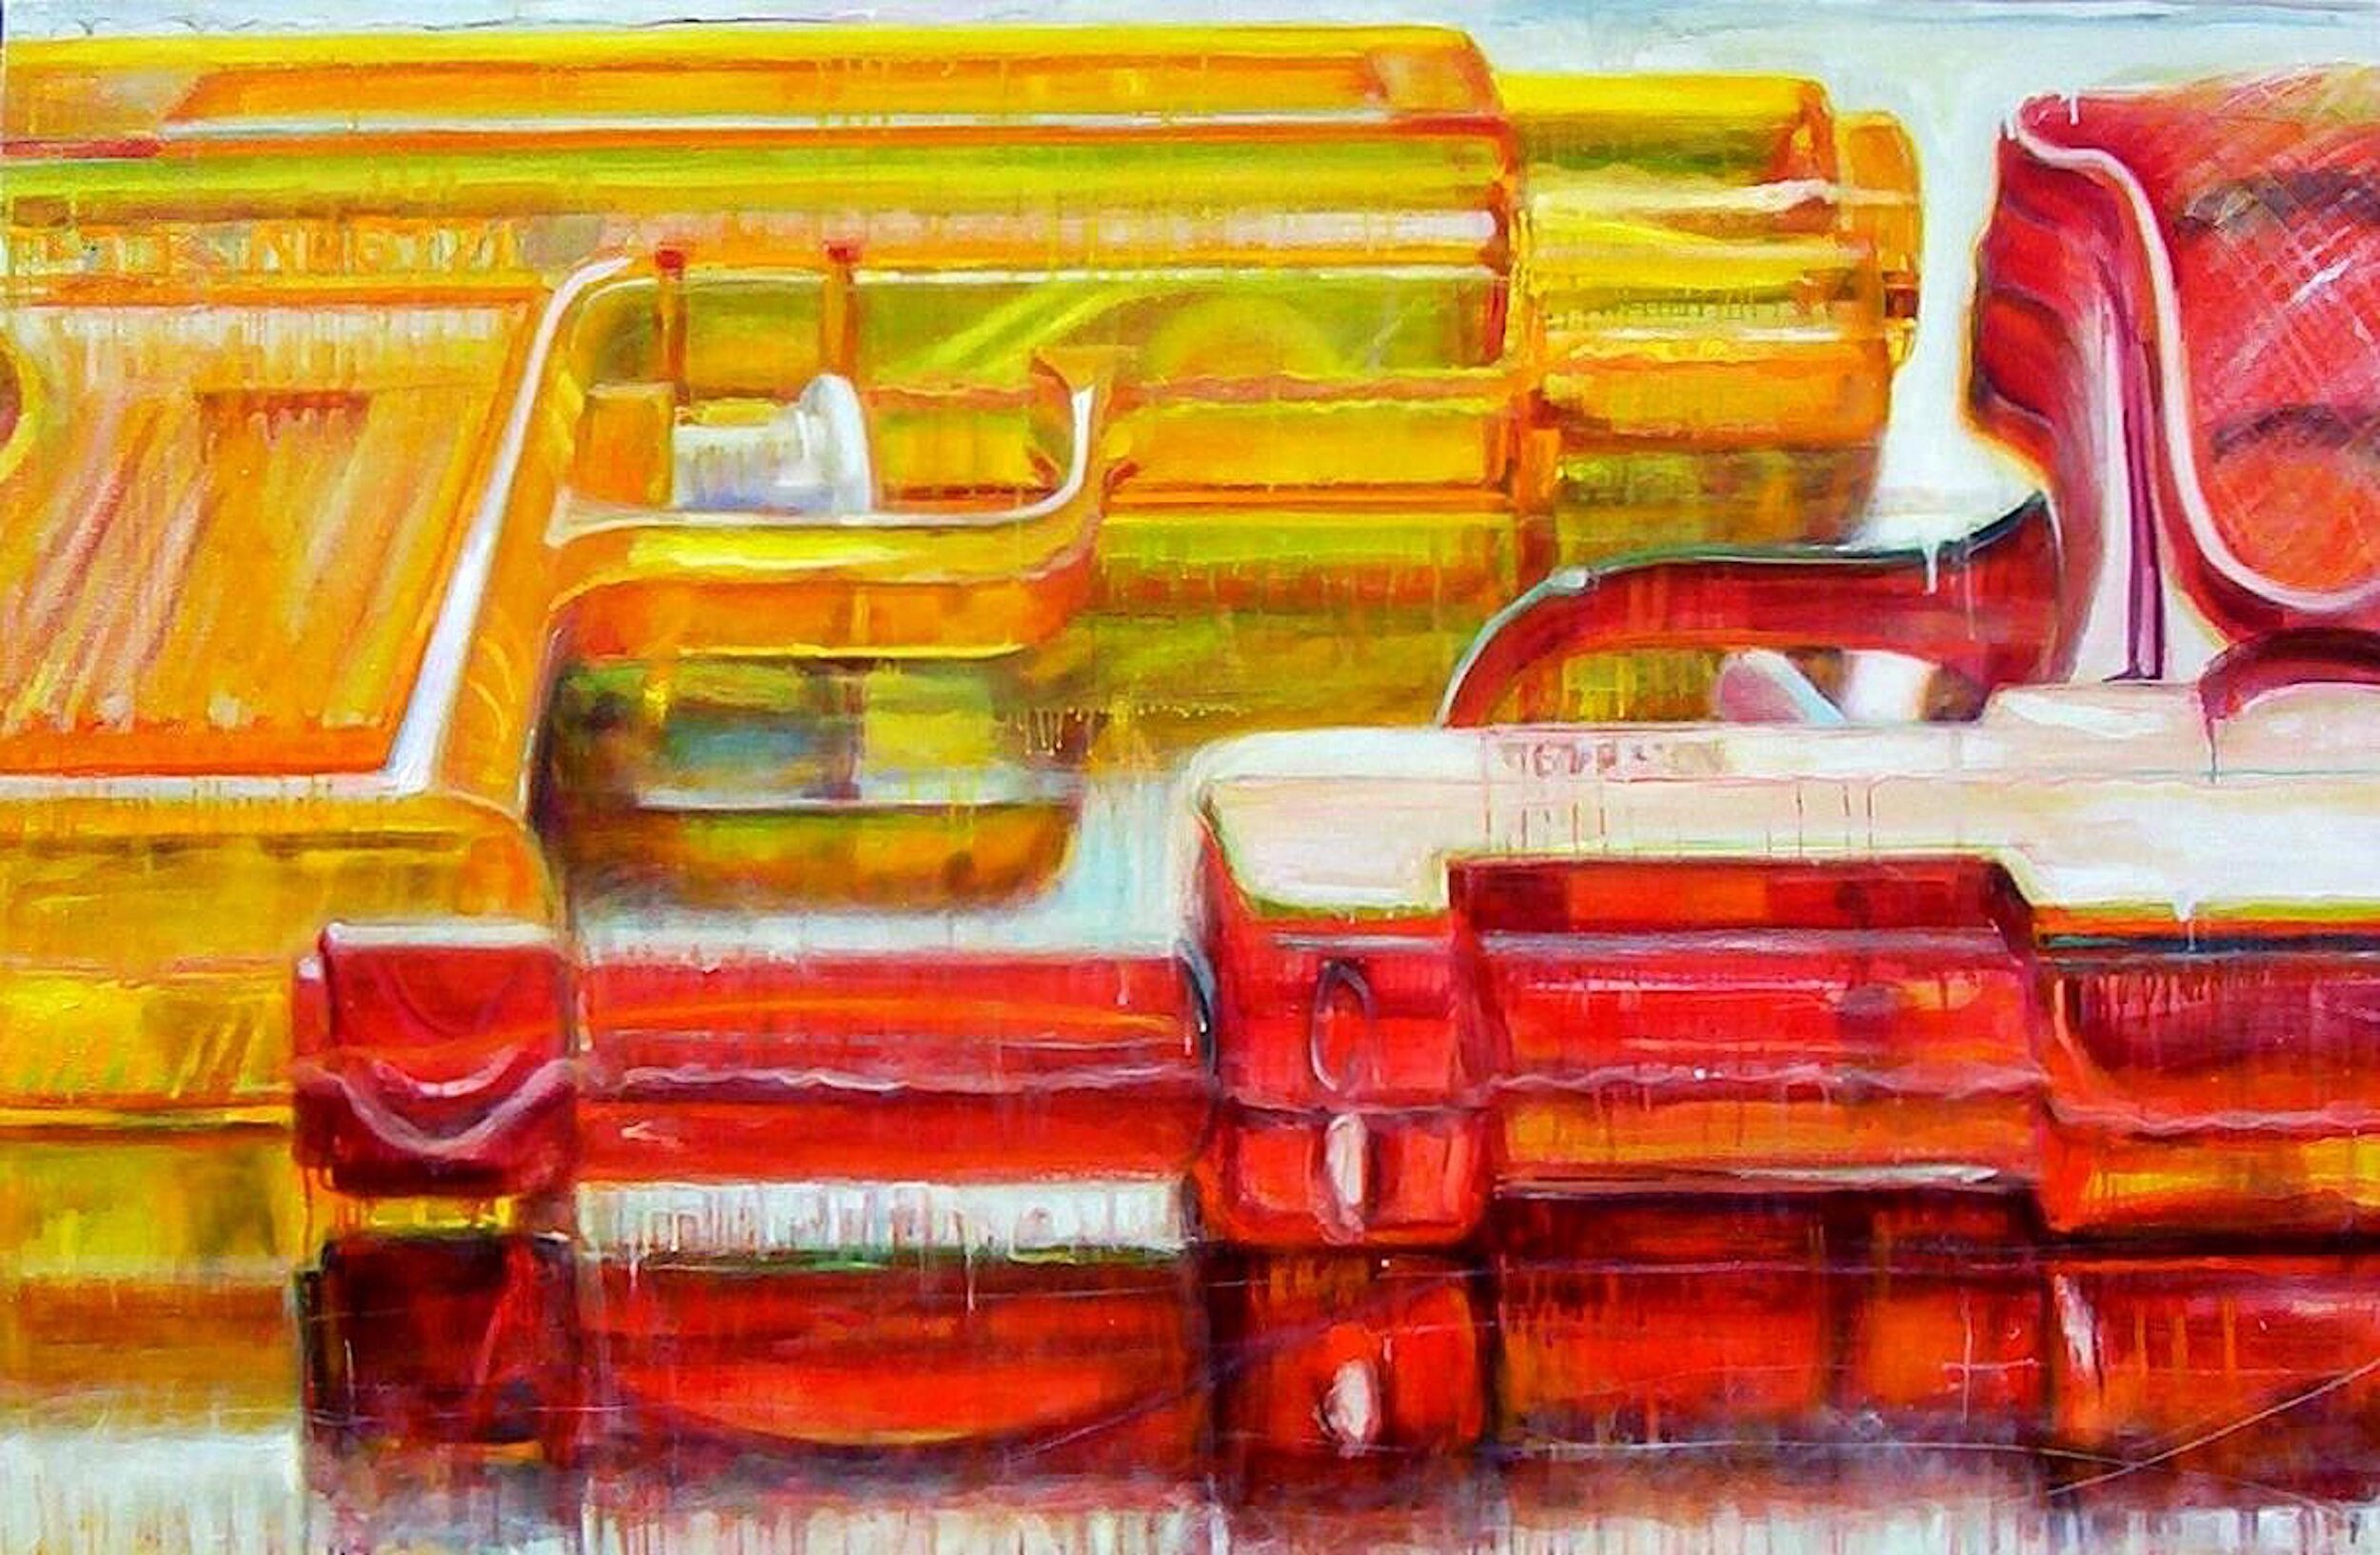  Beverly Rippel,  Slide-in , Oil paint, 38x58 